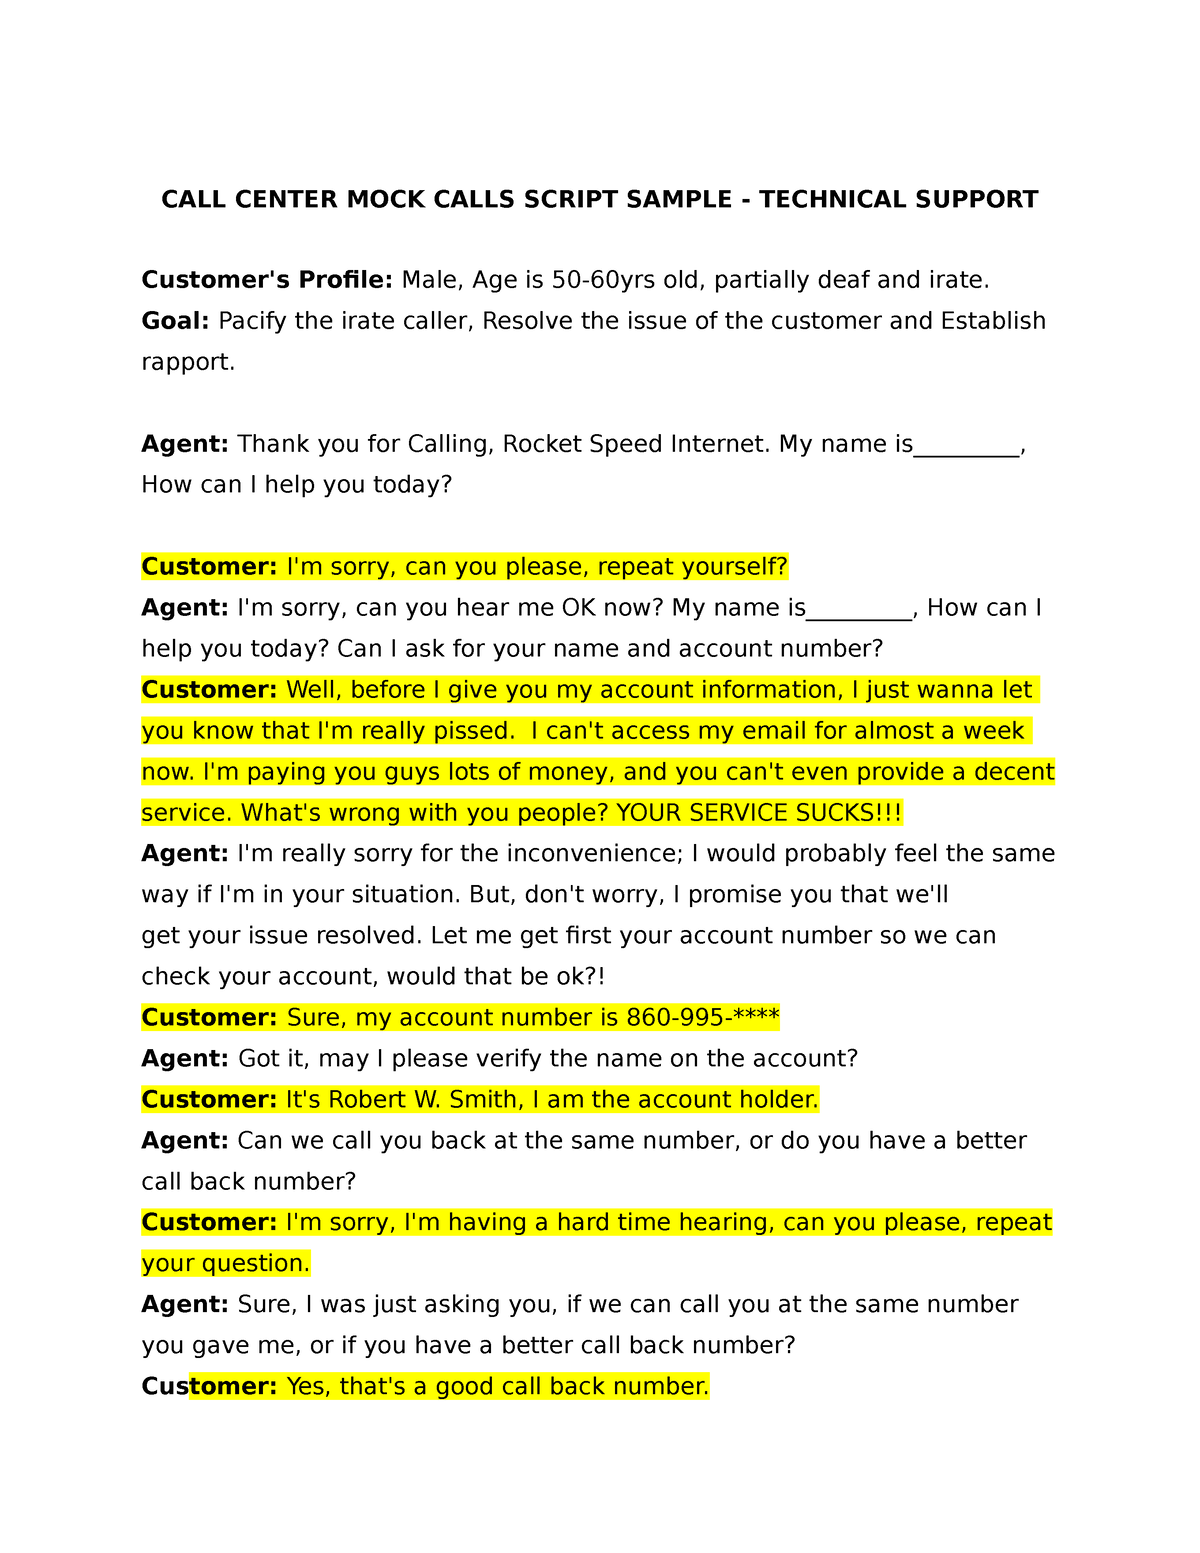 essay about call center agent